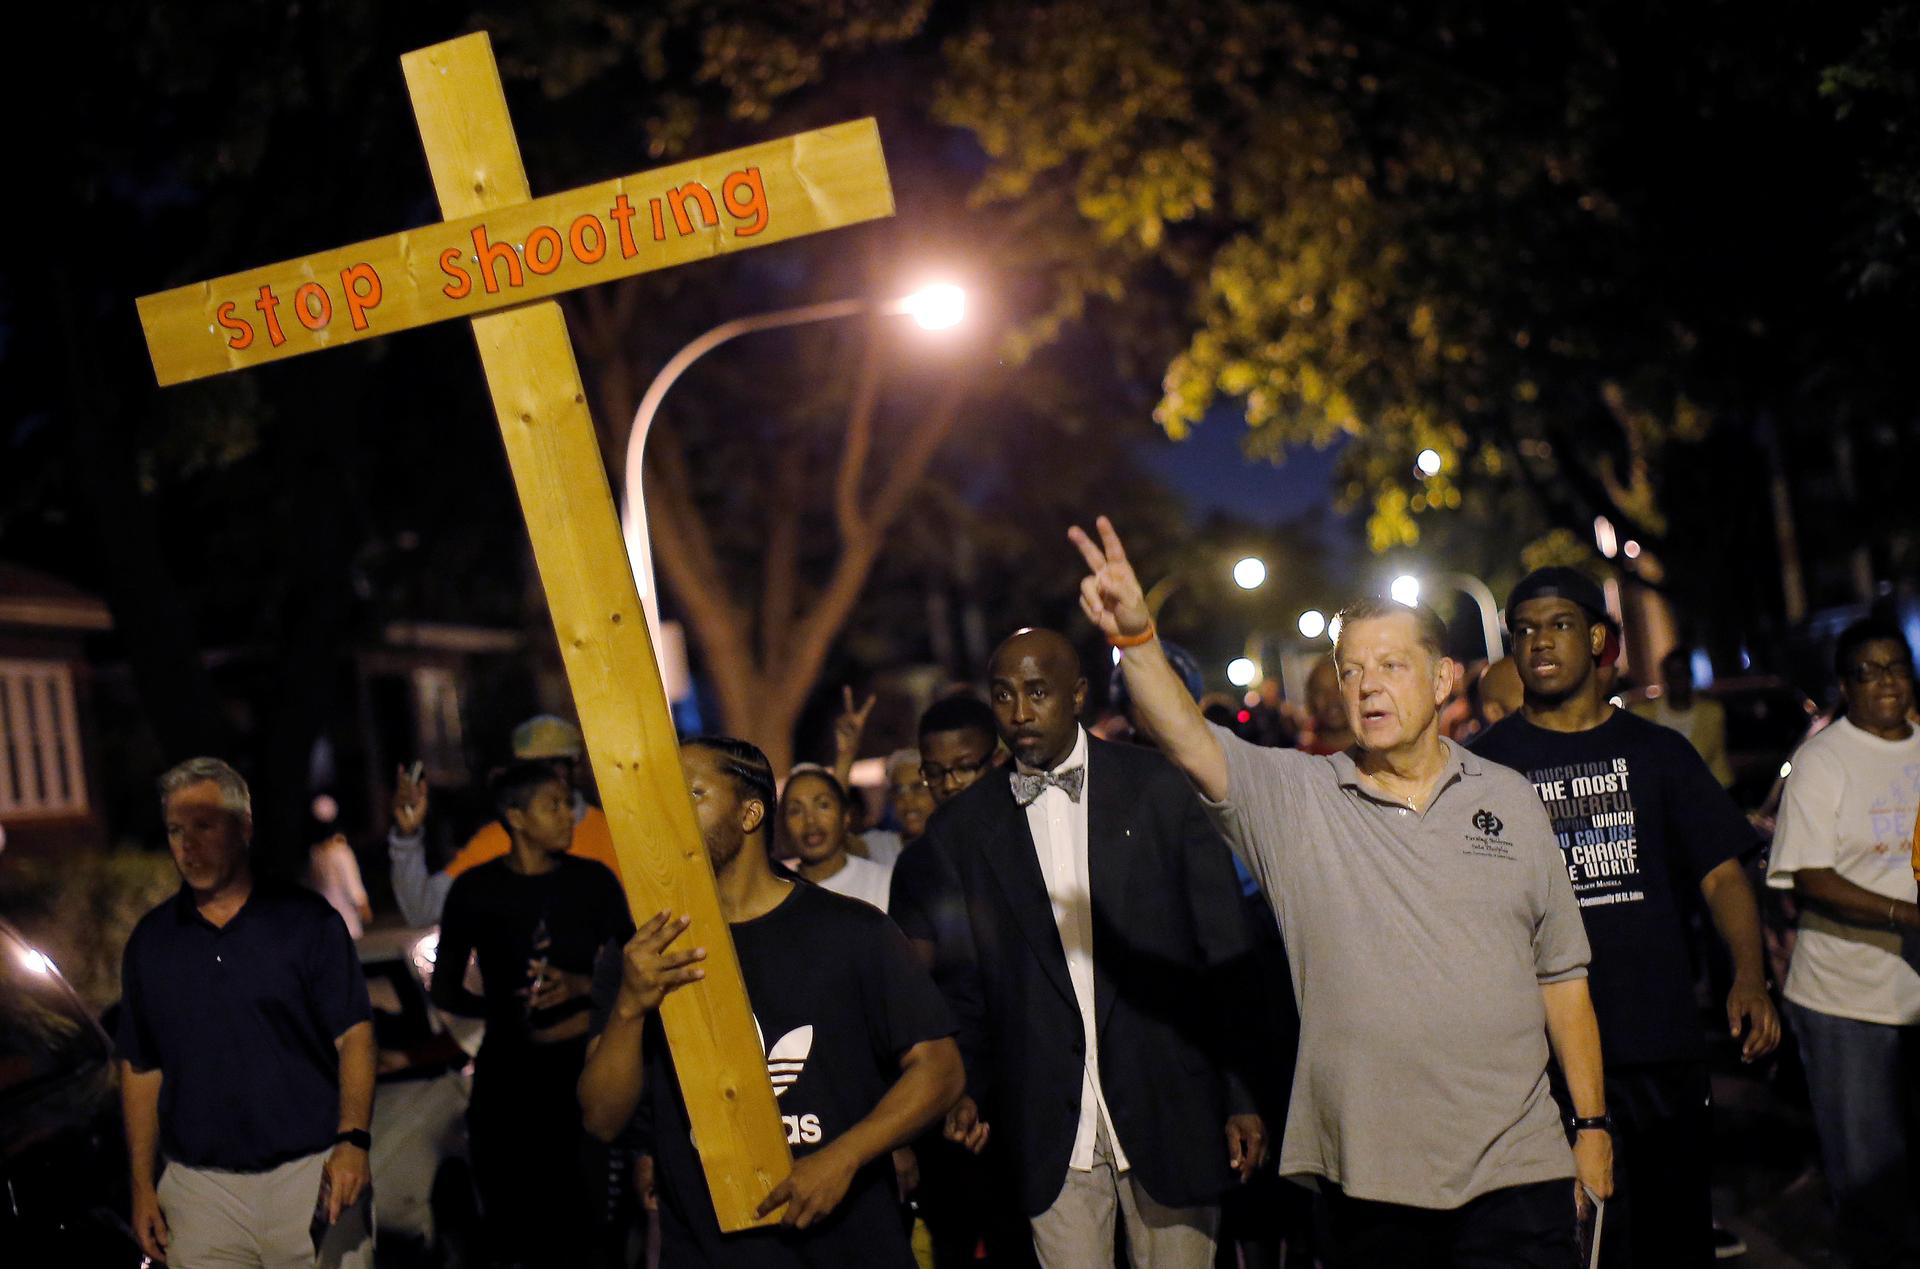 Father Michael Pfleger marches through the streets of a South Side neighborhood during a weekly night-time peace demonstration in Chicago, Illinois, September 16, 2016.